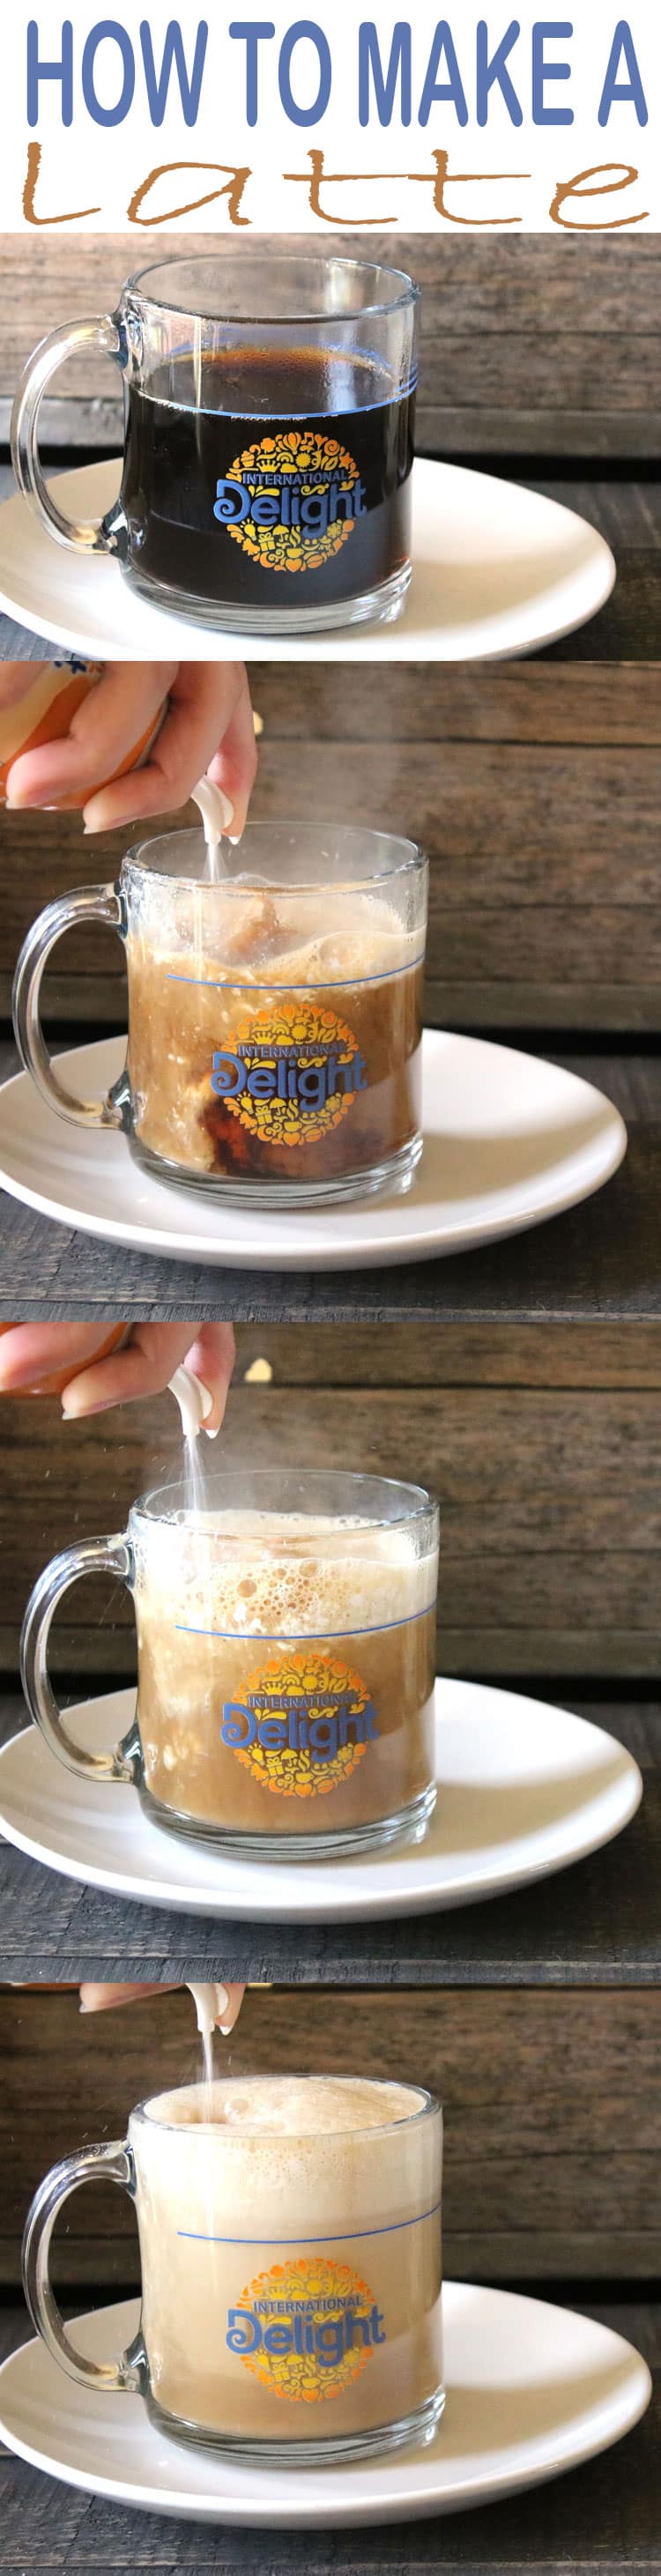 Step by step directions on how to make a latte with this easy process and product from International Delight One Touch Latte.